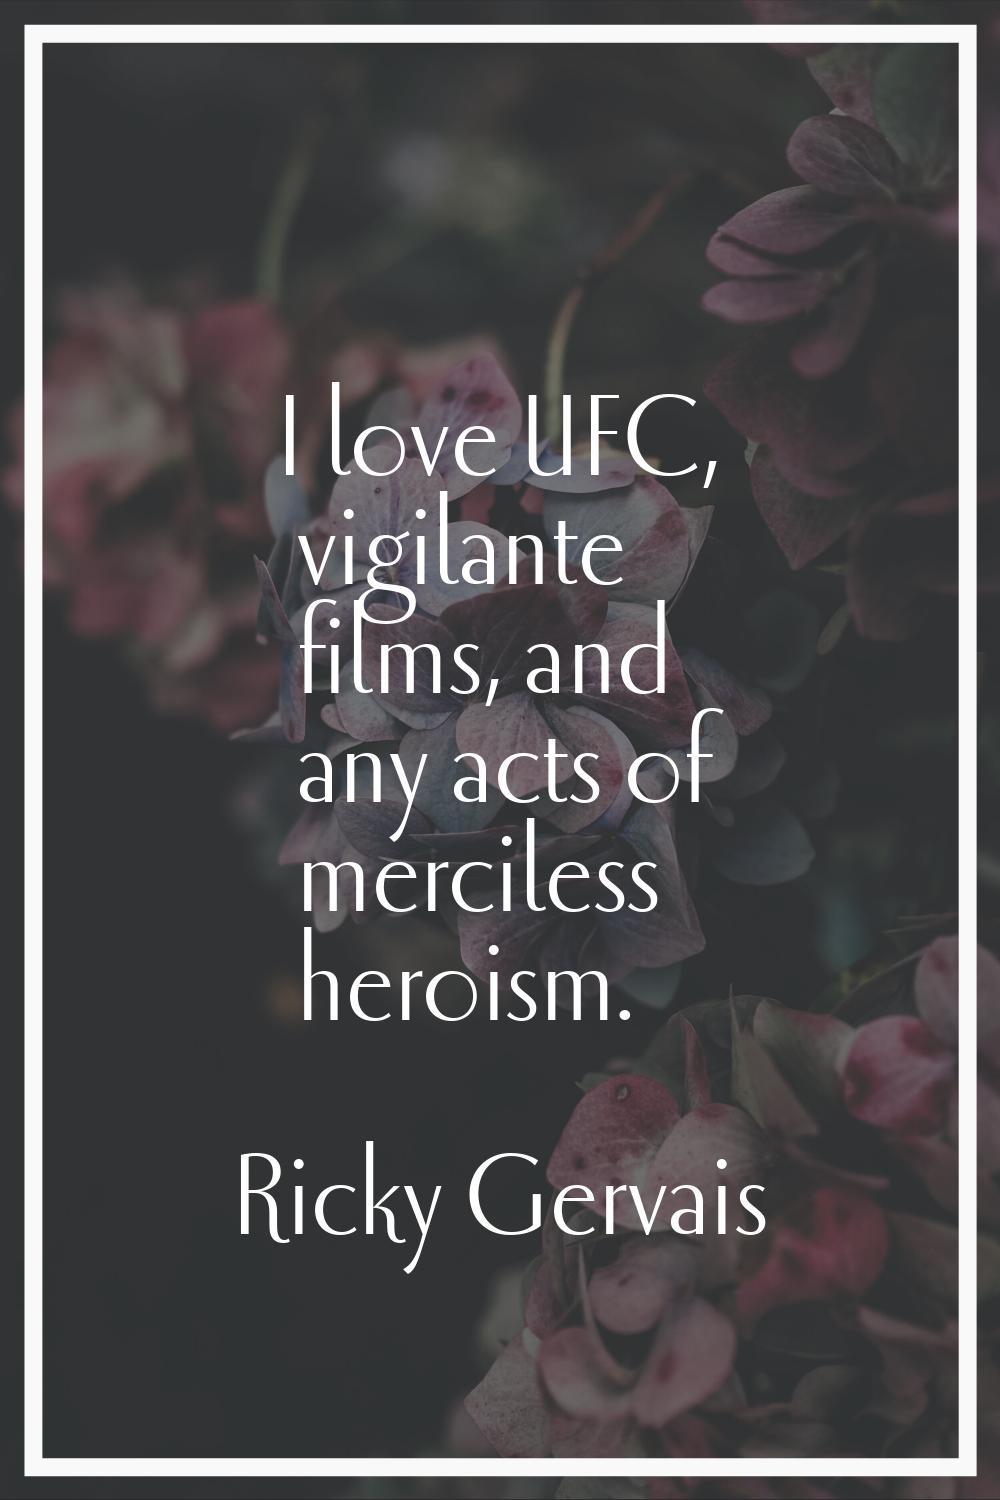 I love UFC, vigilante films, and any acts of merciless heroism.